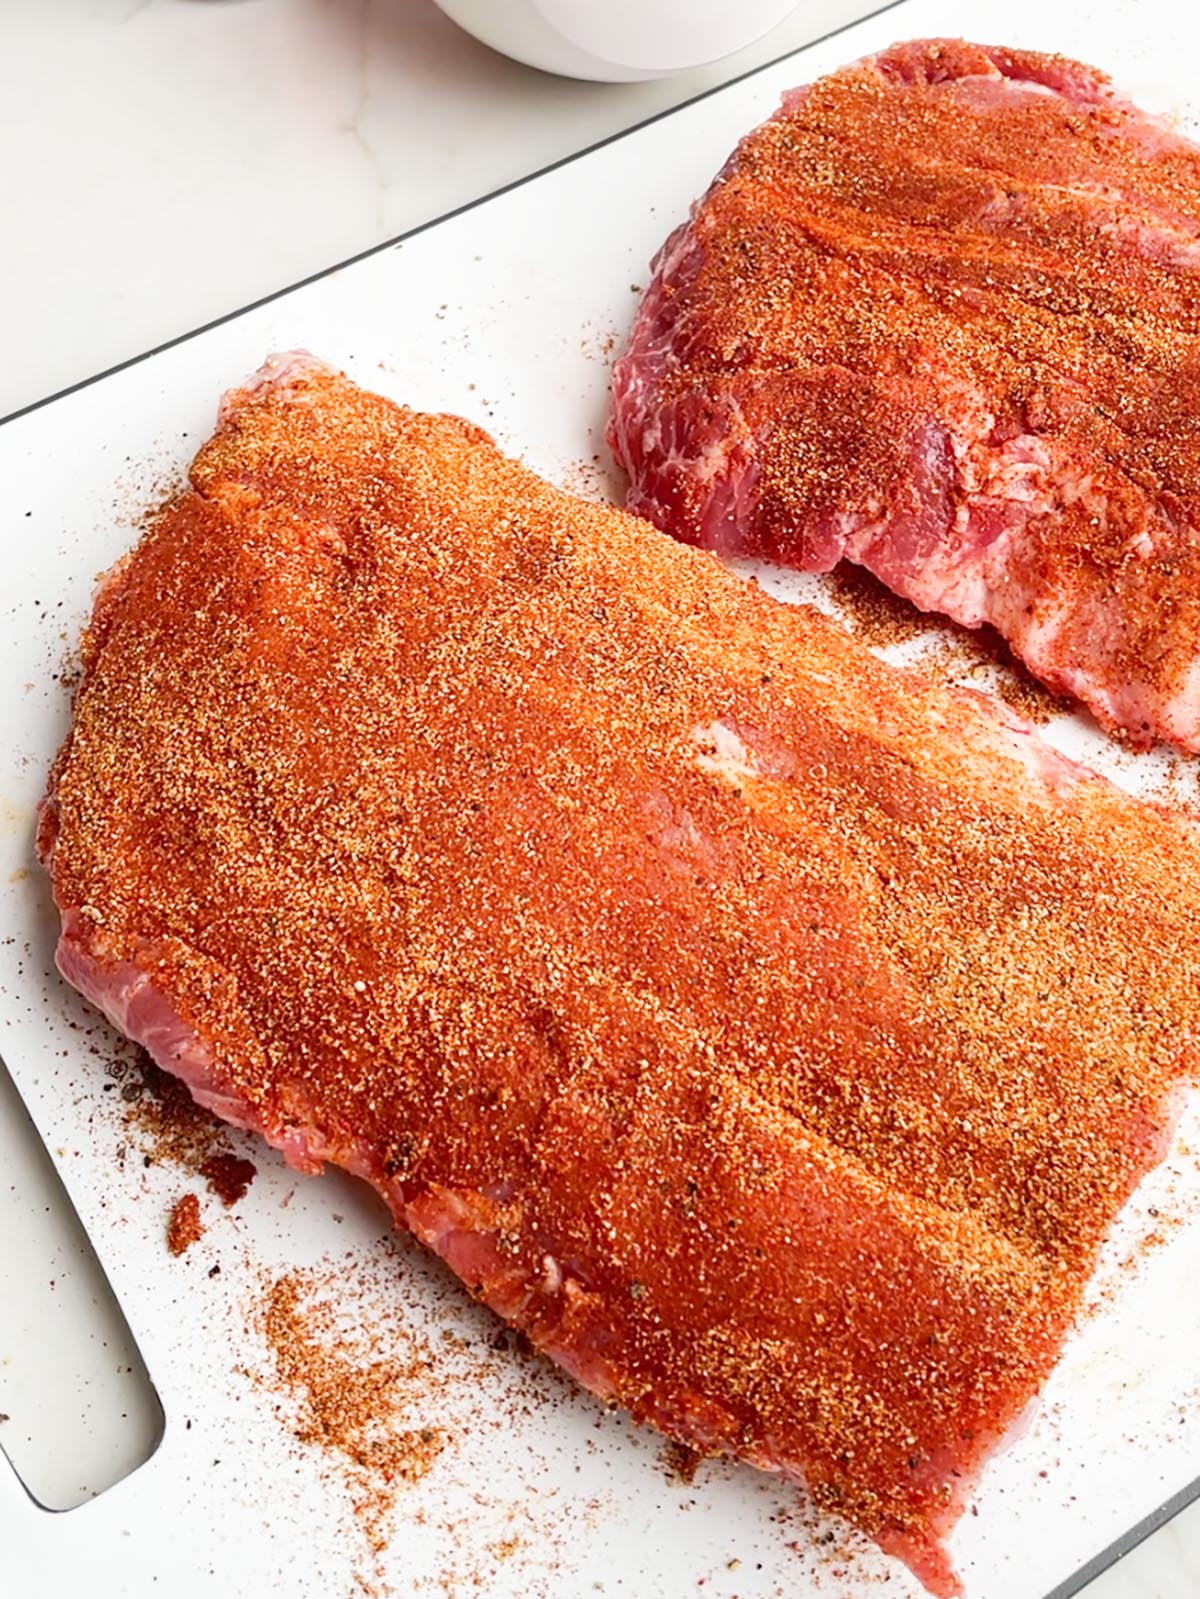 two half racks of ribs with dry rub on a white cutting board.